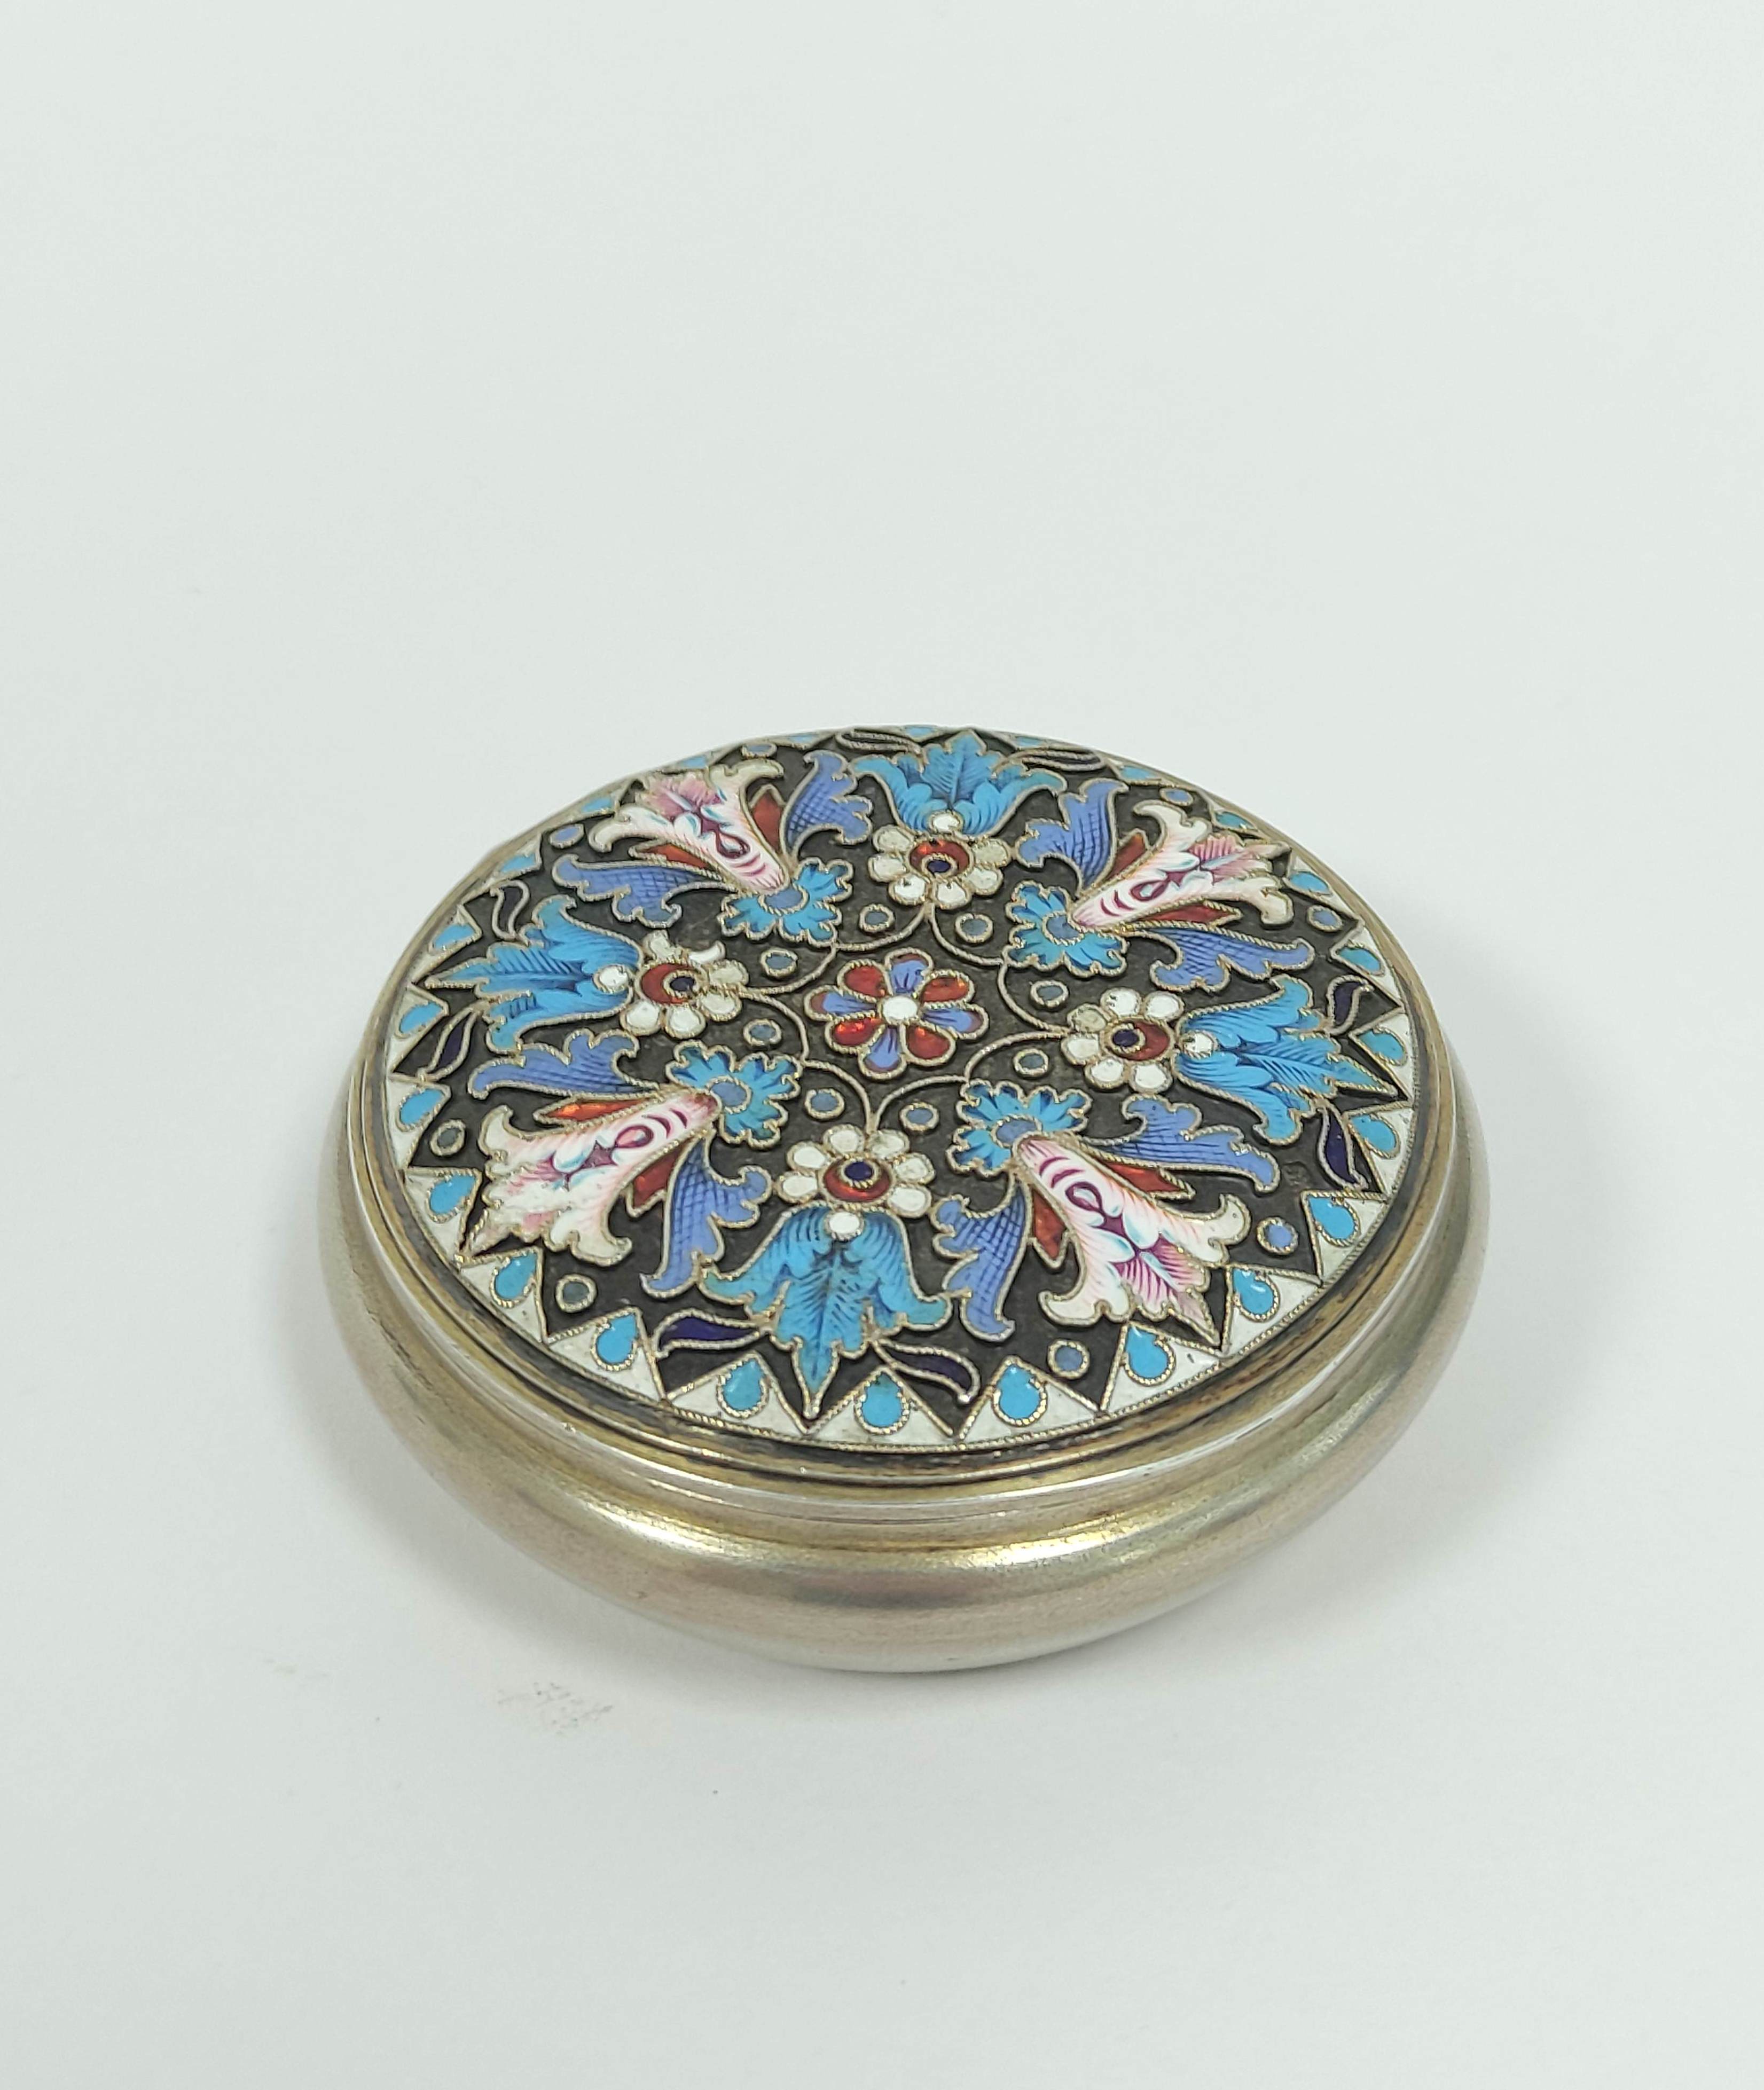 Faberge silver gilt and enamel circular box with angular sides and cover in blue, white pink and